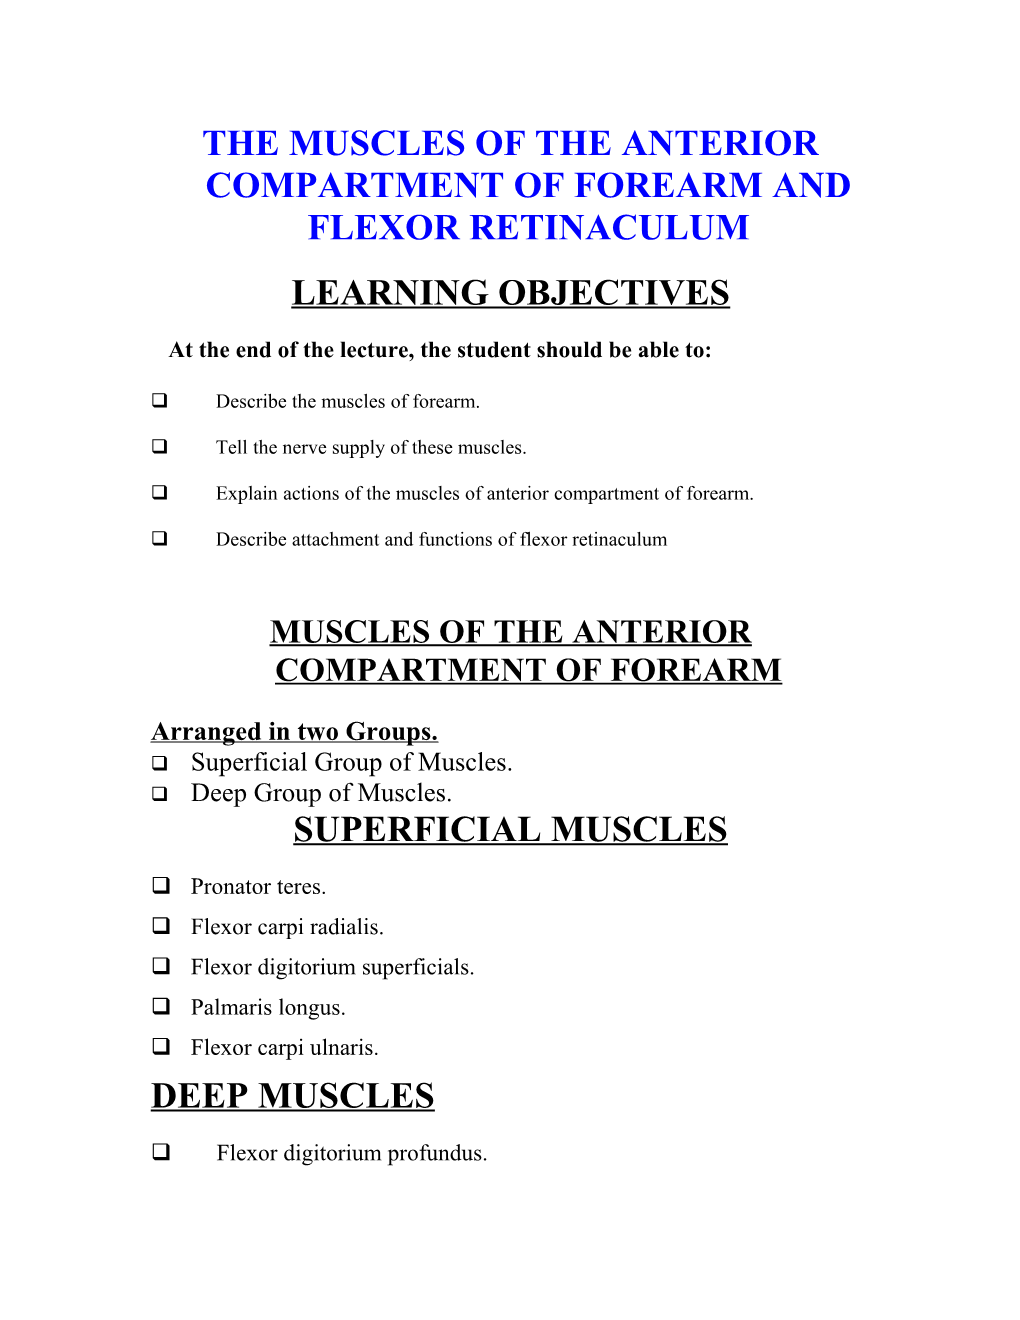 The Muscles of the Anterior Compartment of Forearm and Flexor Retinaculum